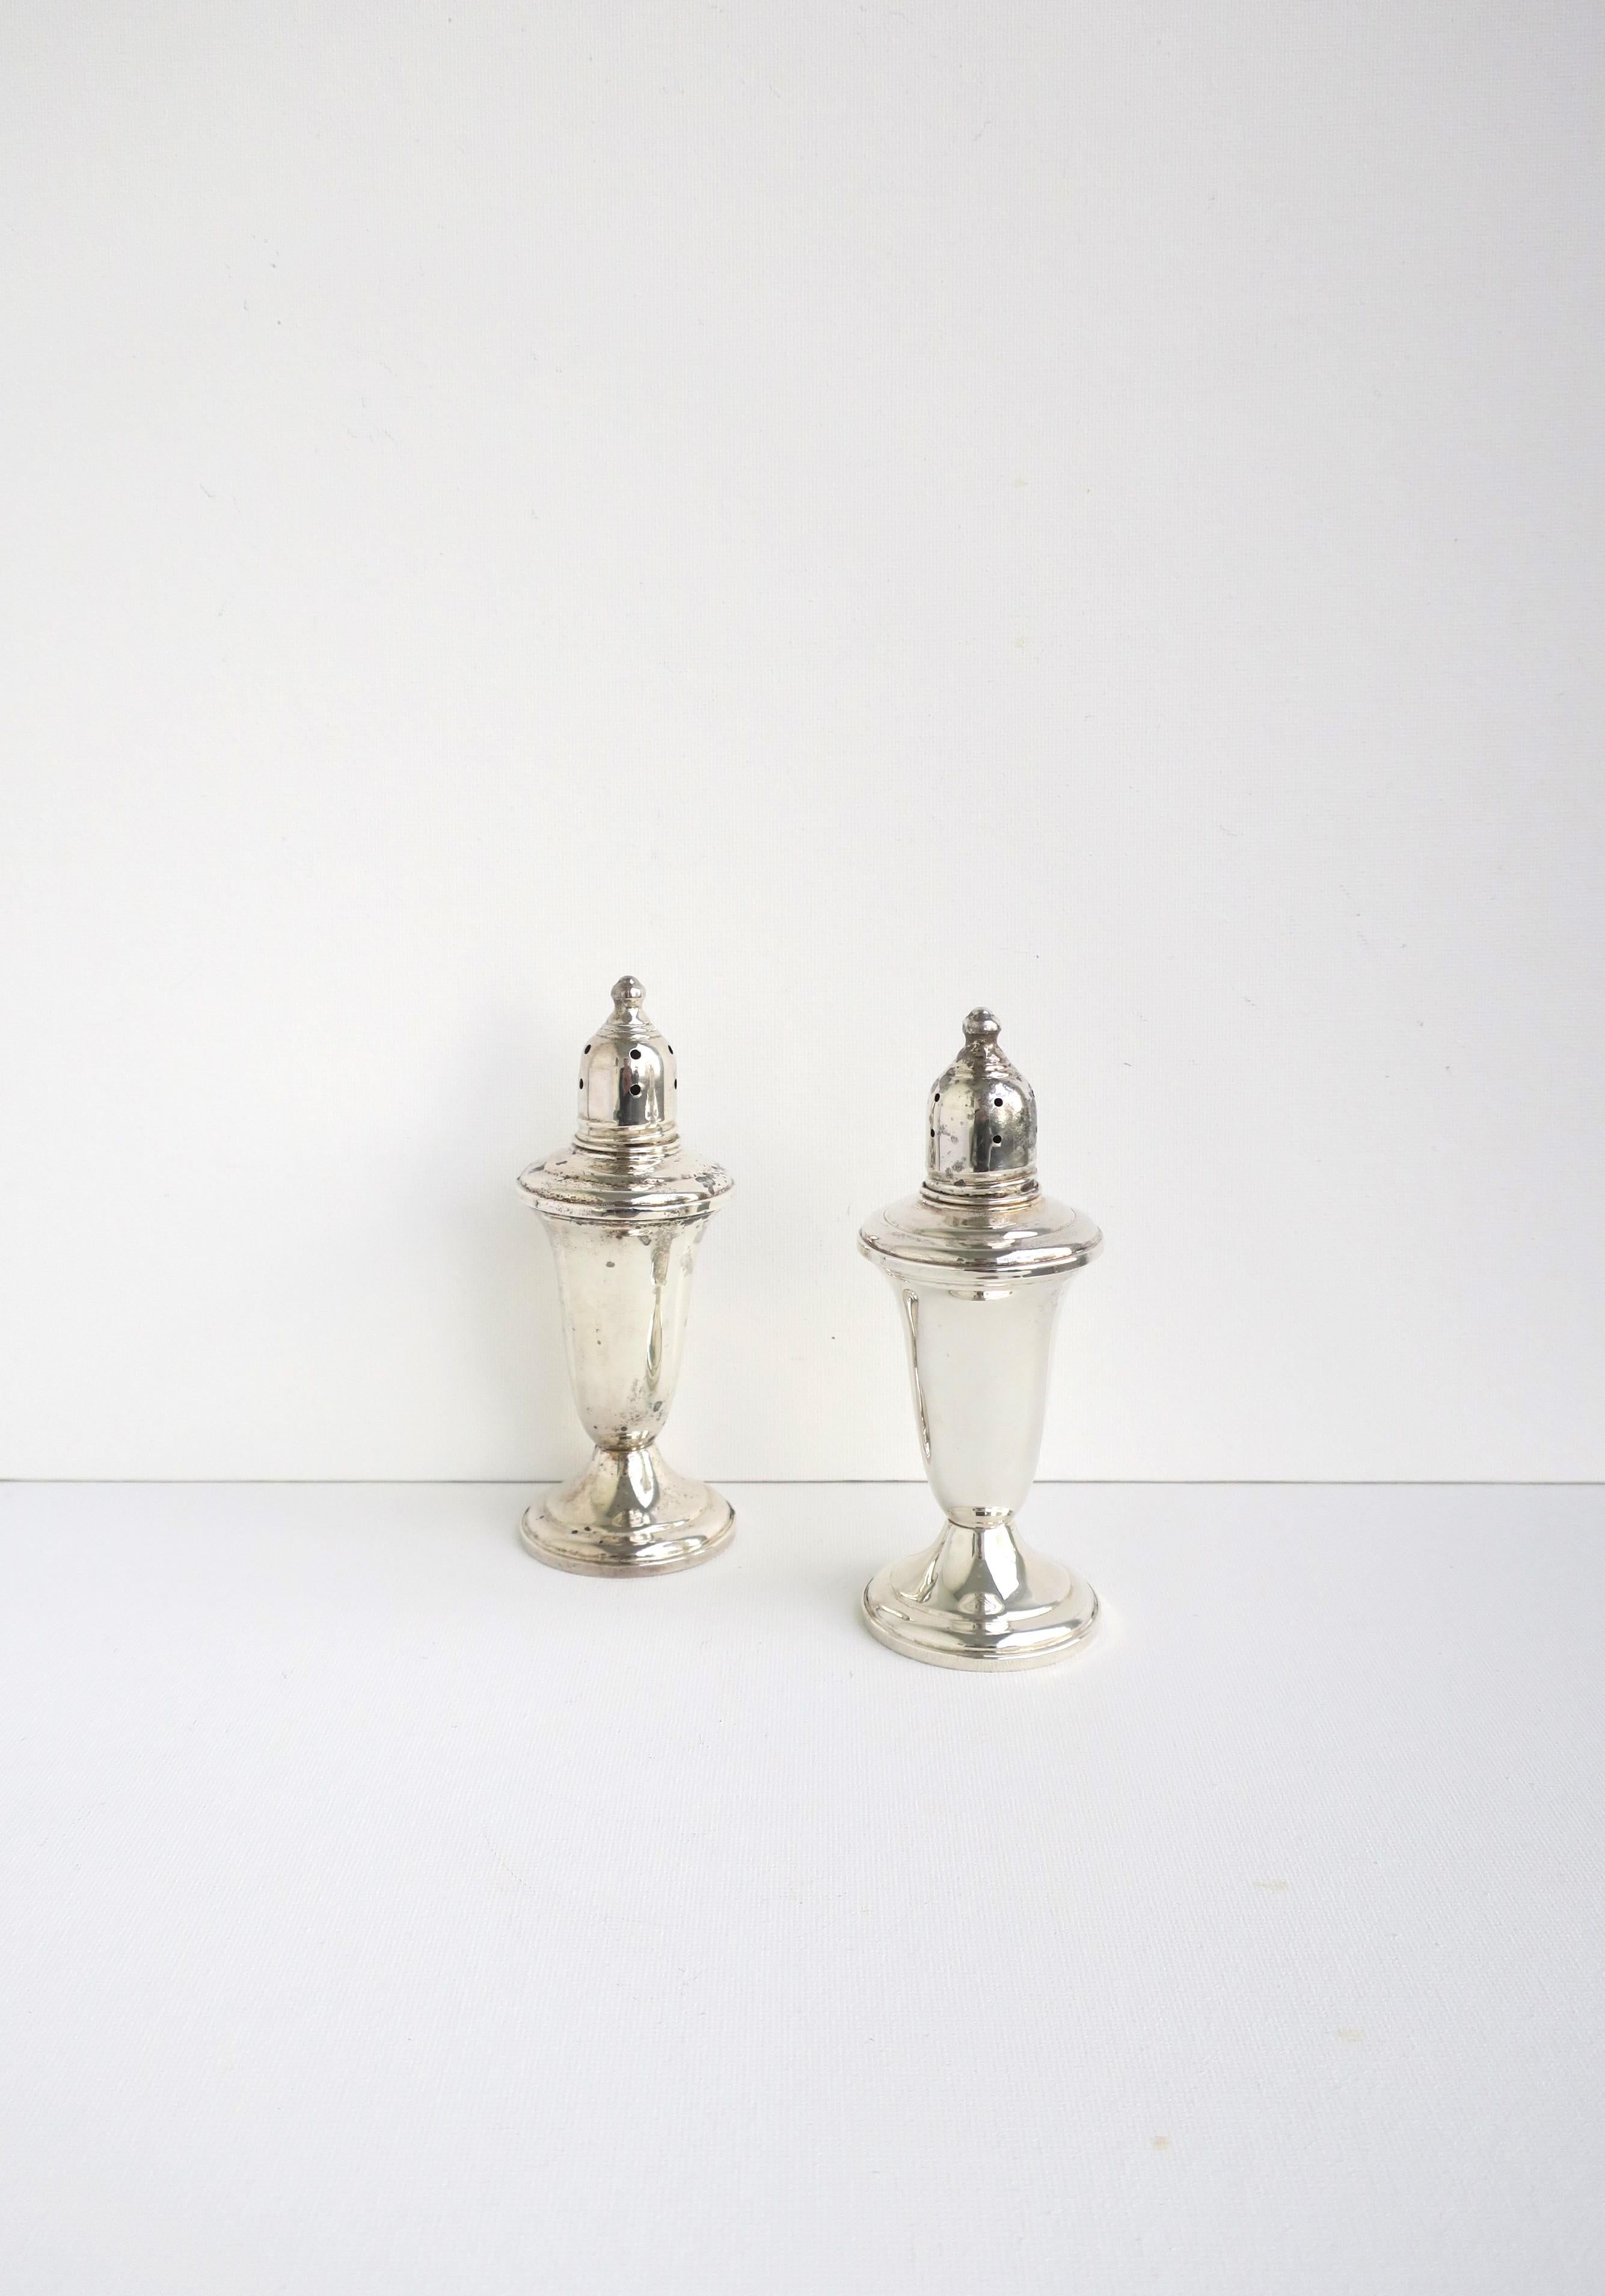 20th Century Sterling Silver Shreve Crump & Low, Salt and Pepper Shakers, Pair